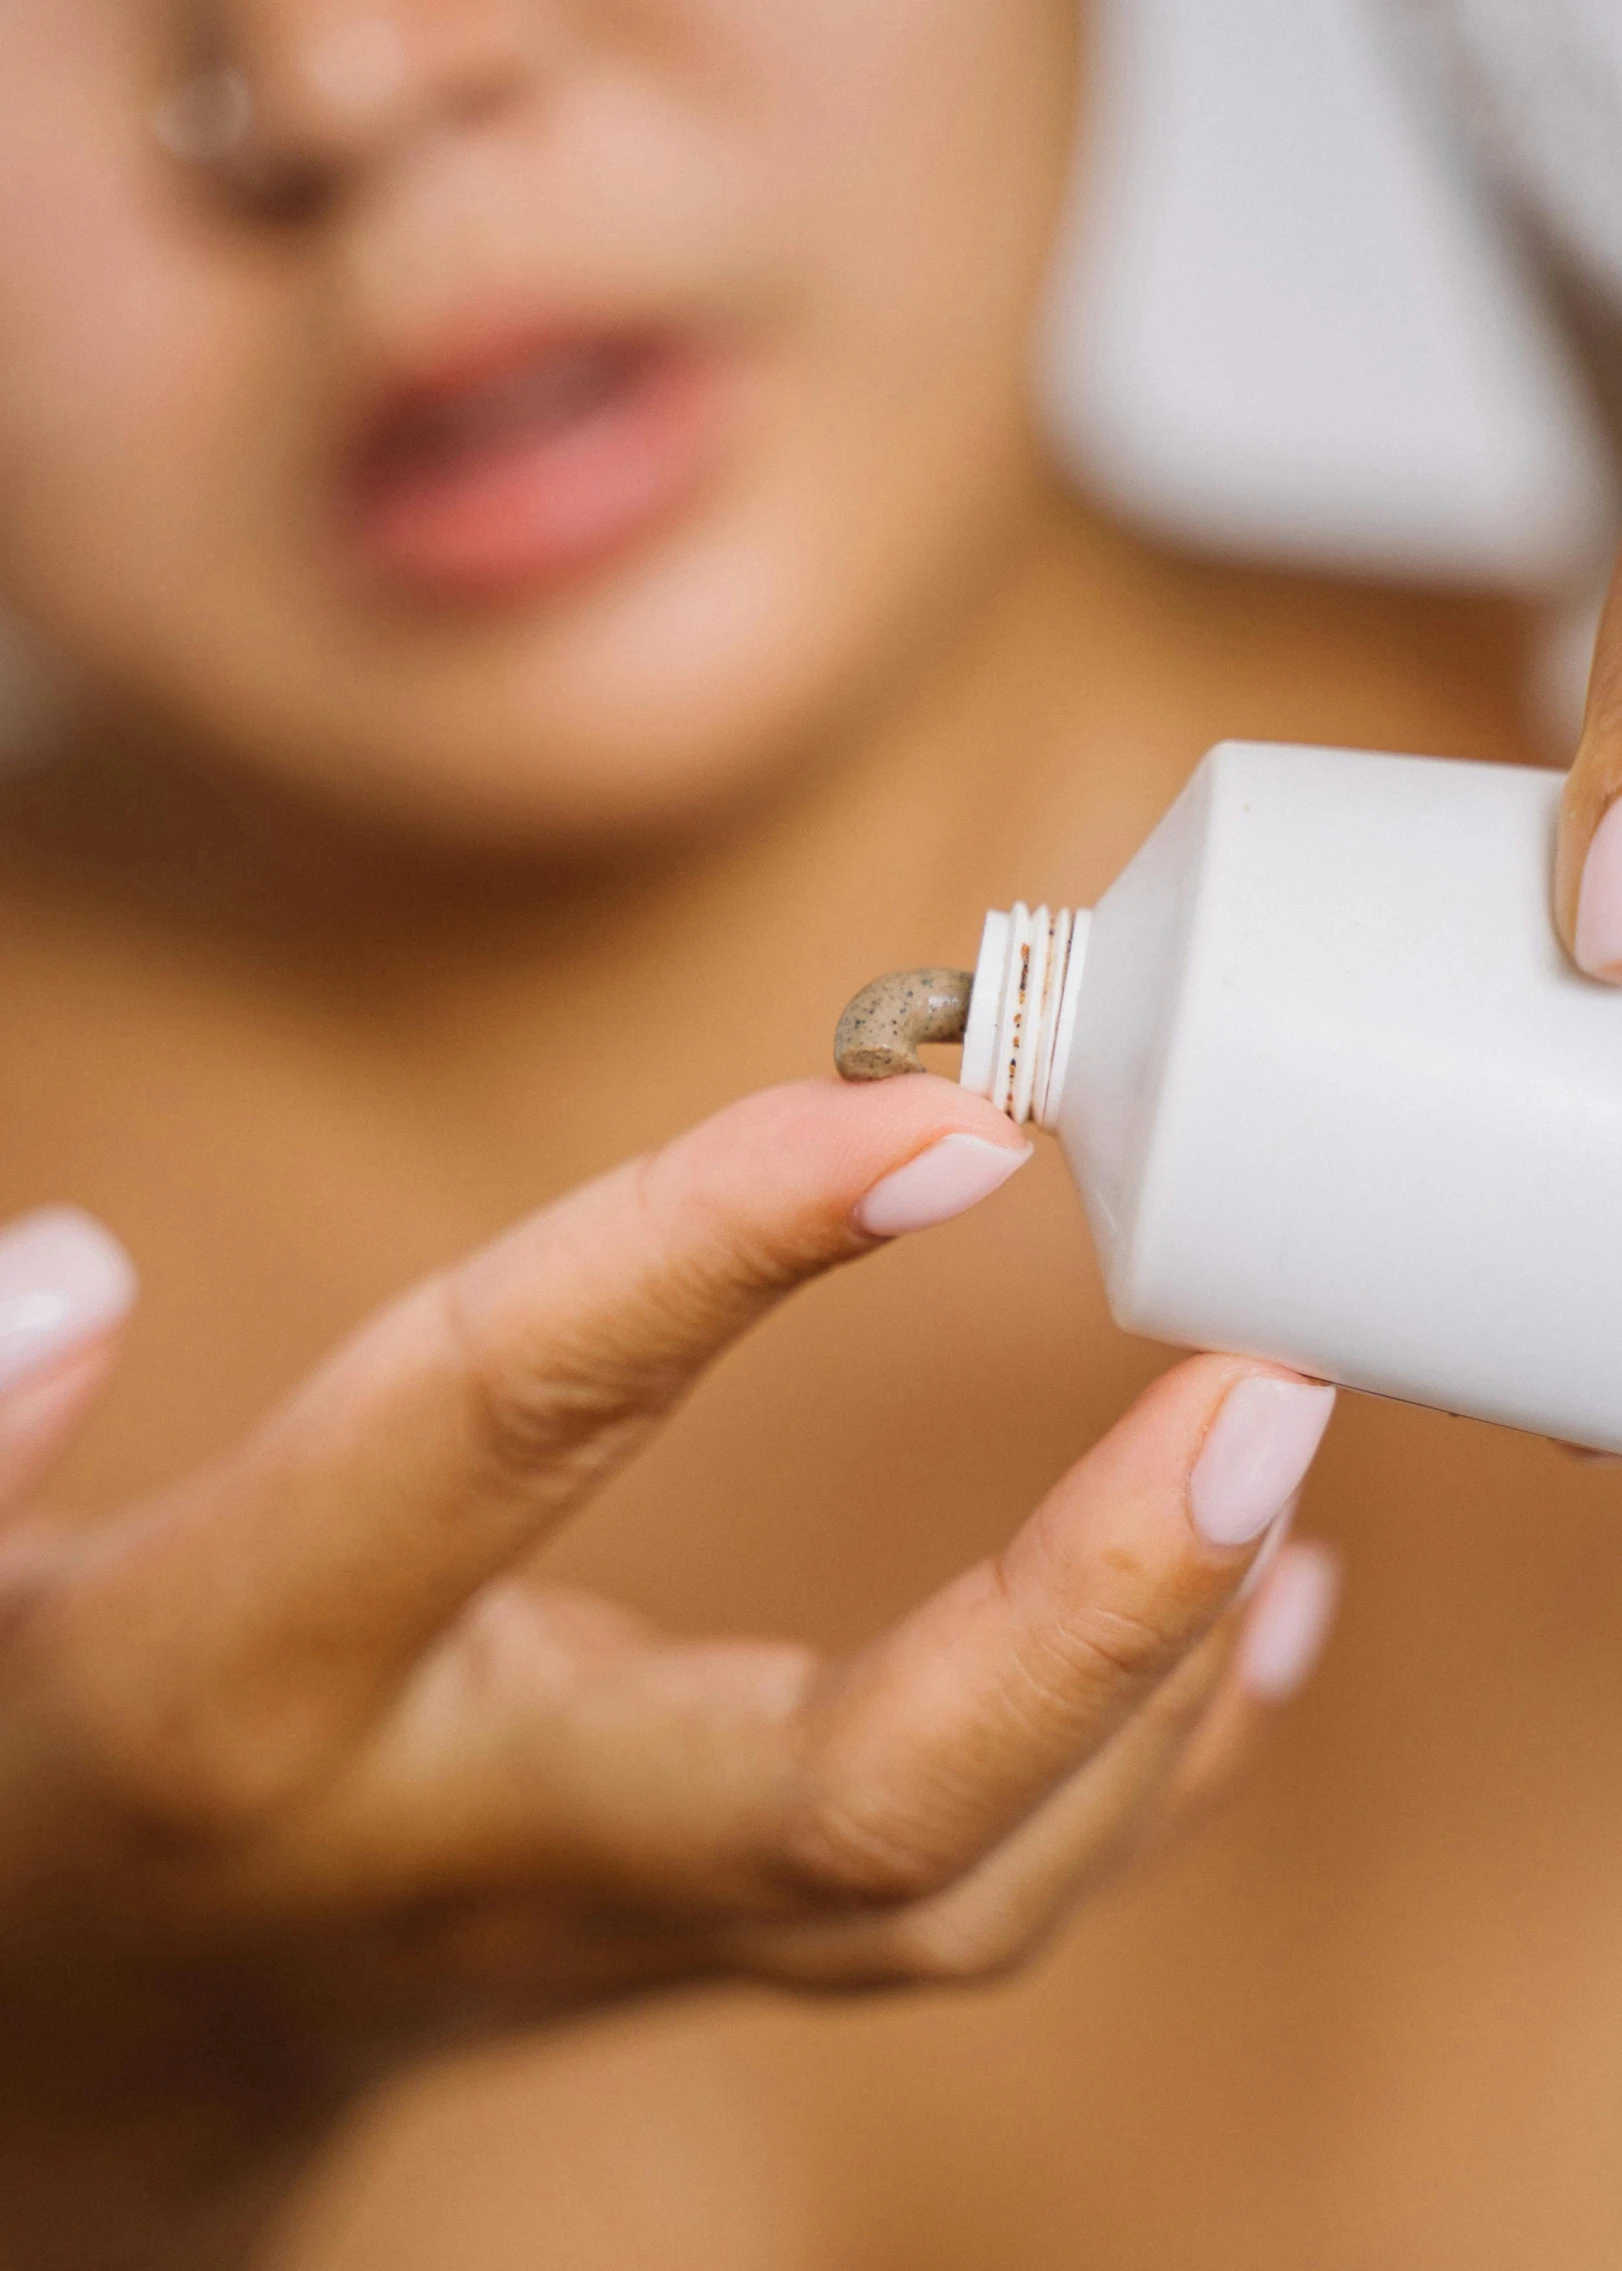 a woman holding a tube of toothpaste in one hand and a tube of toothpaste in the other, trending on pexels, happening, oiled skin, hibernation capsule close-up, brown, filling the frame